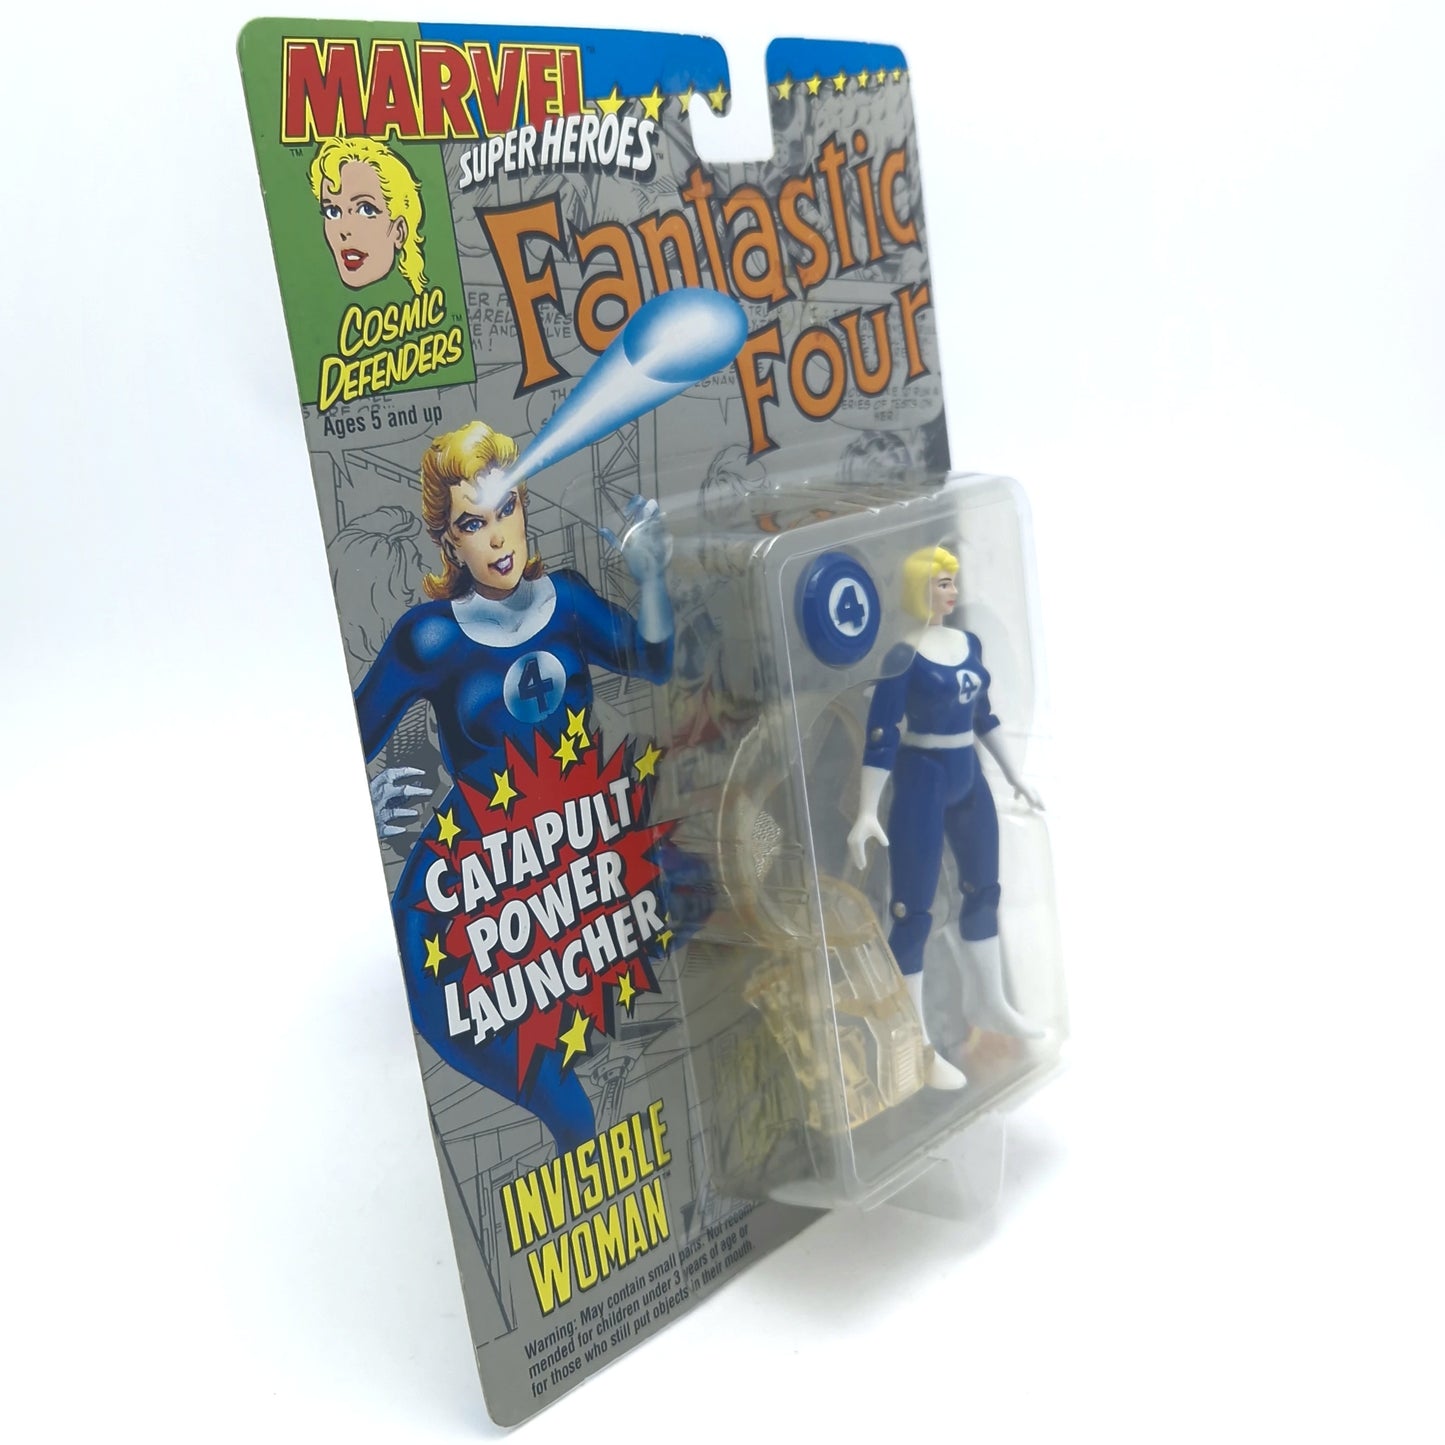 MARVEL SUPERHEROES ☆ FANTASIC FOUR SET THING MR HUMAN TORCH INVISIBLE WOMAN Figure ☆ 90's MOC Sealed Carded Toybiz 90s